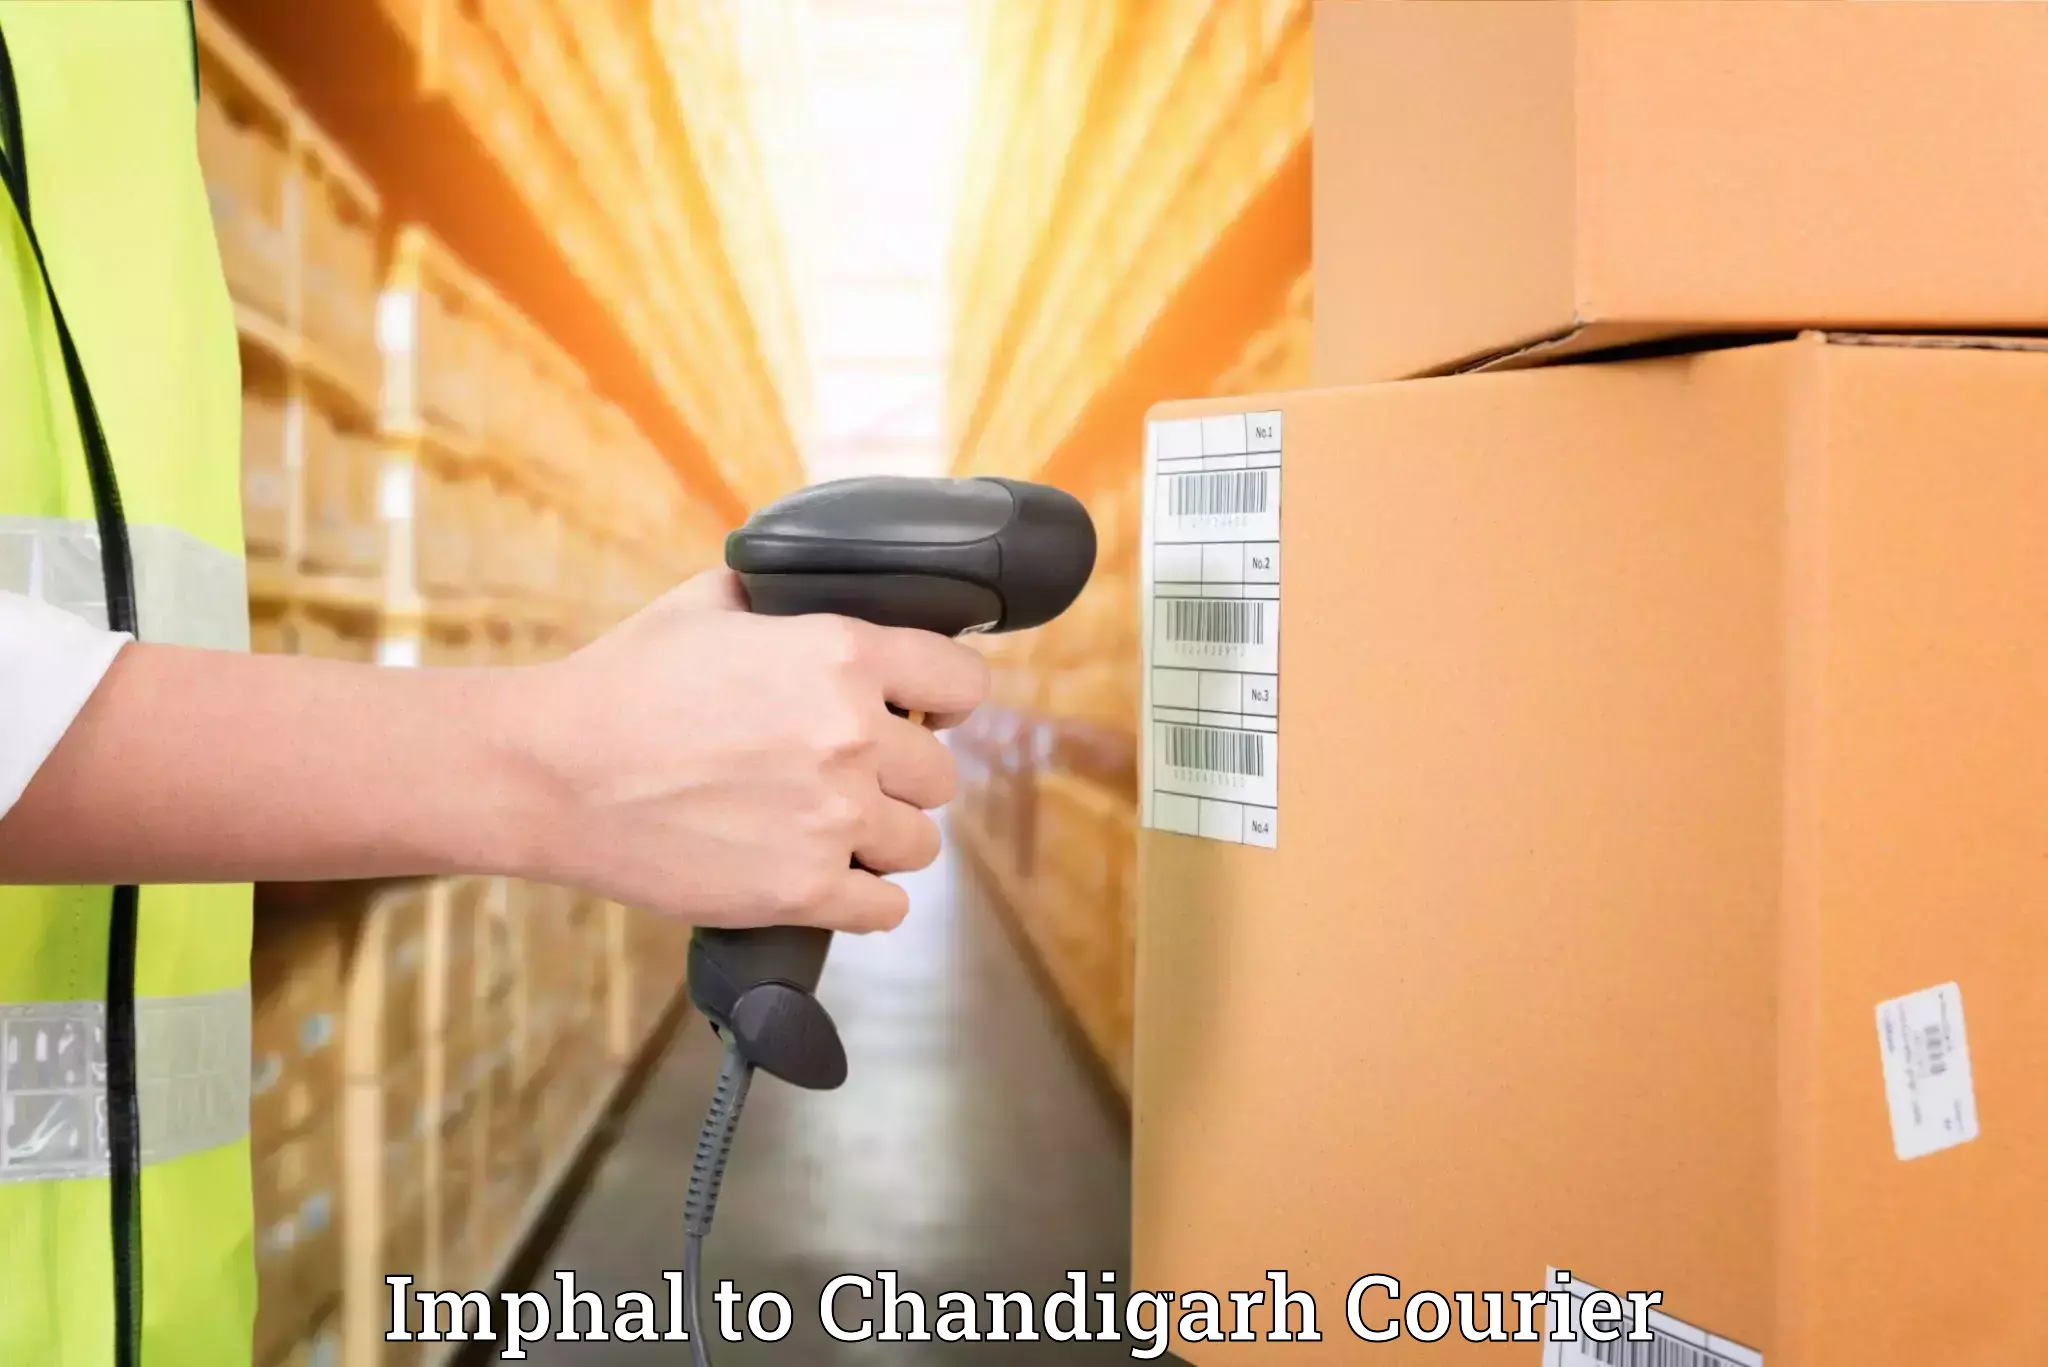 Furniture delivery service Imphal to Kharar